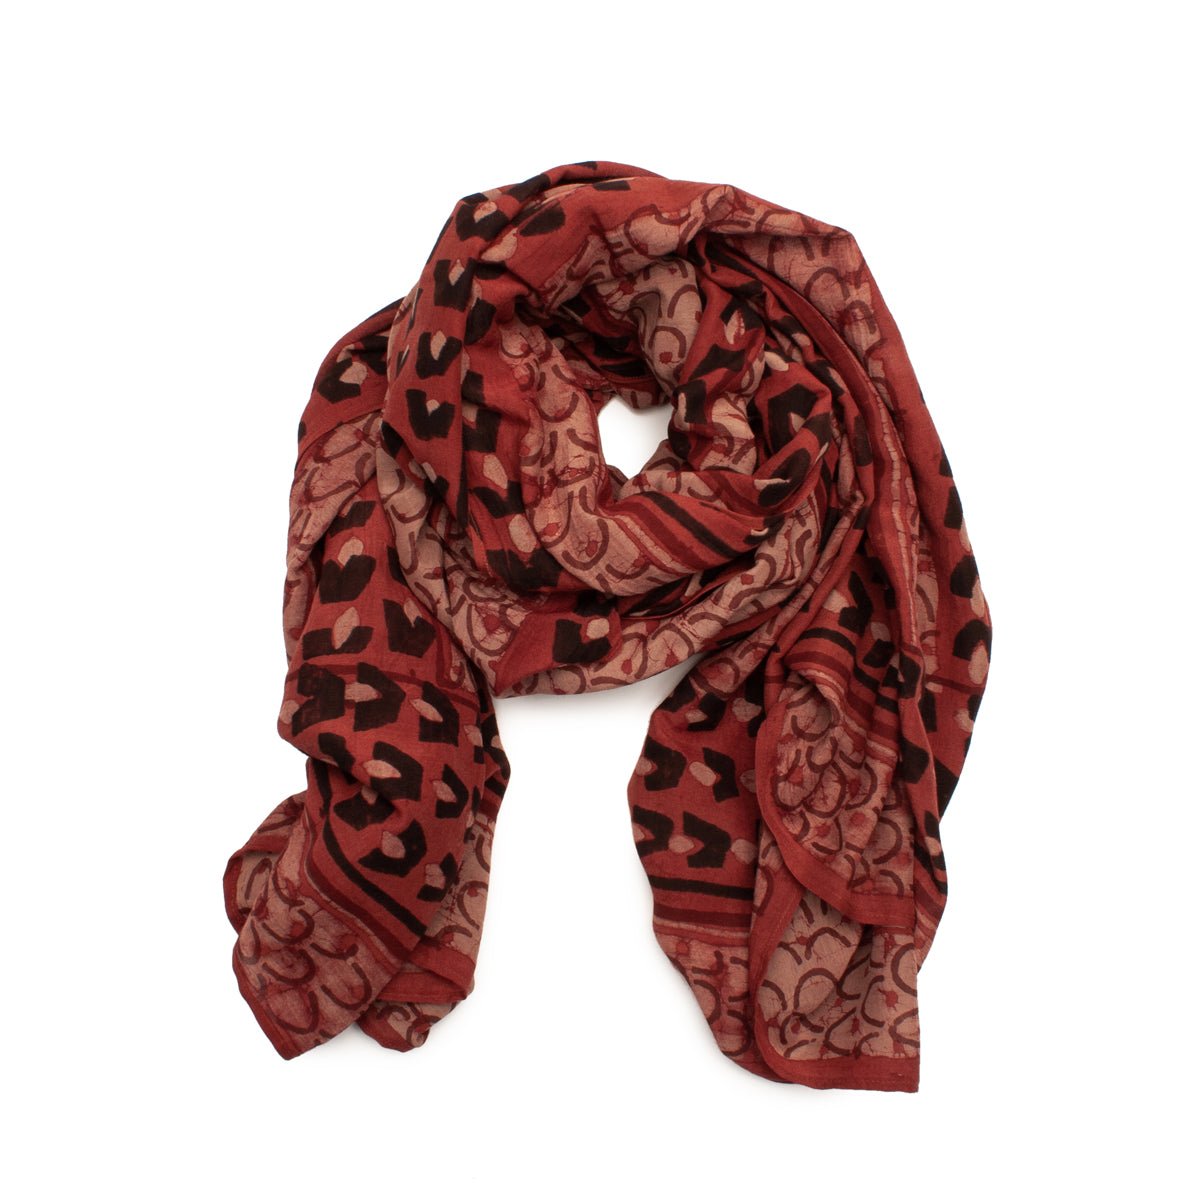 Ruby Cotton & Silk Scarf by Ichcha. Made in India.